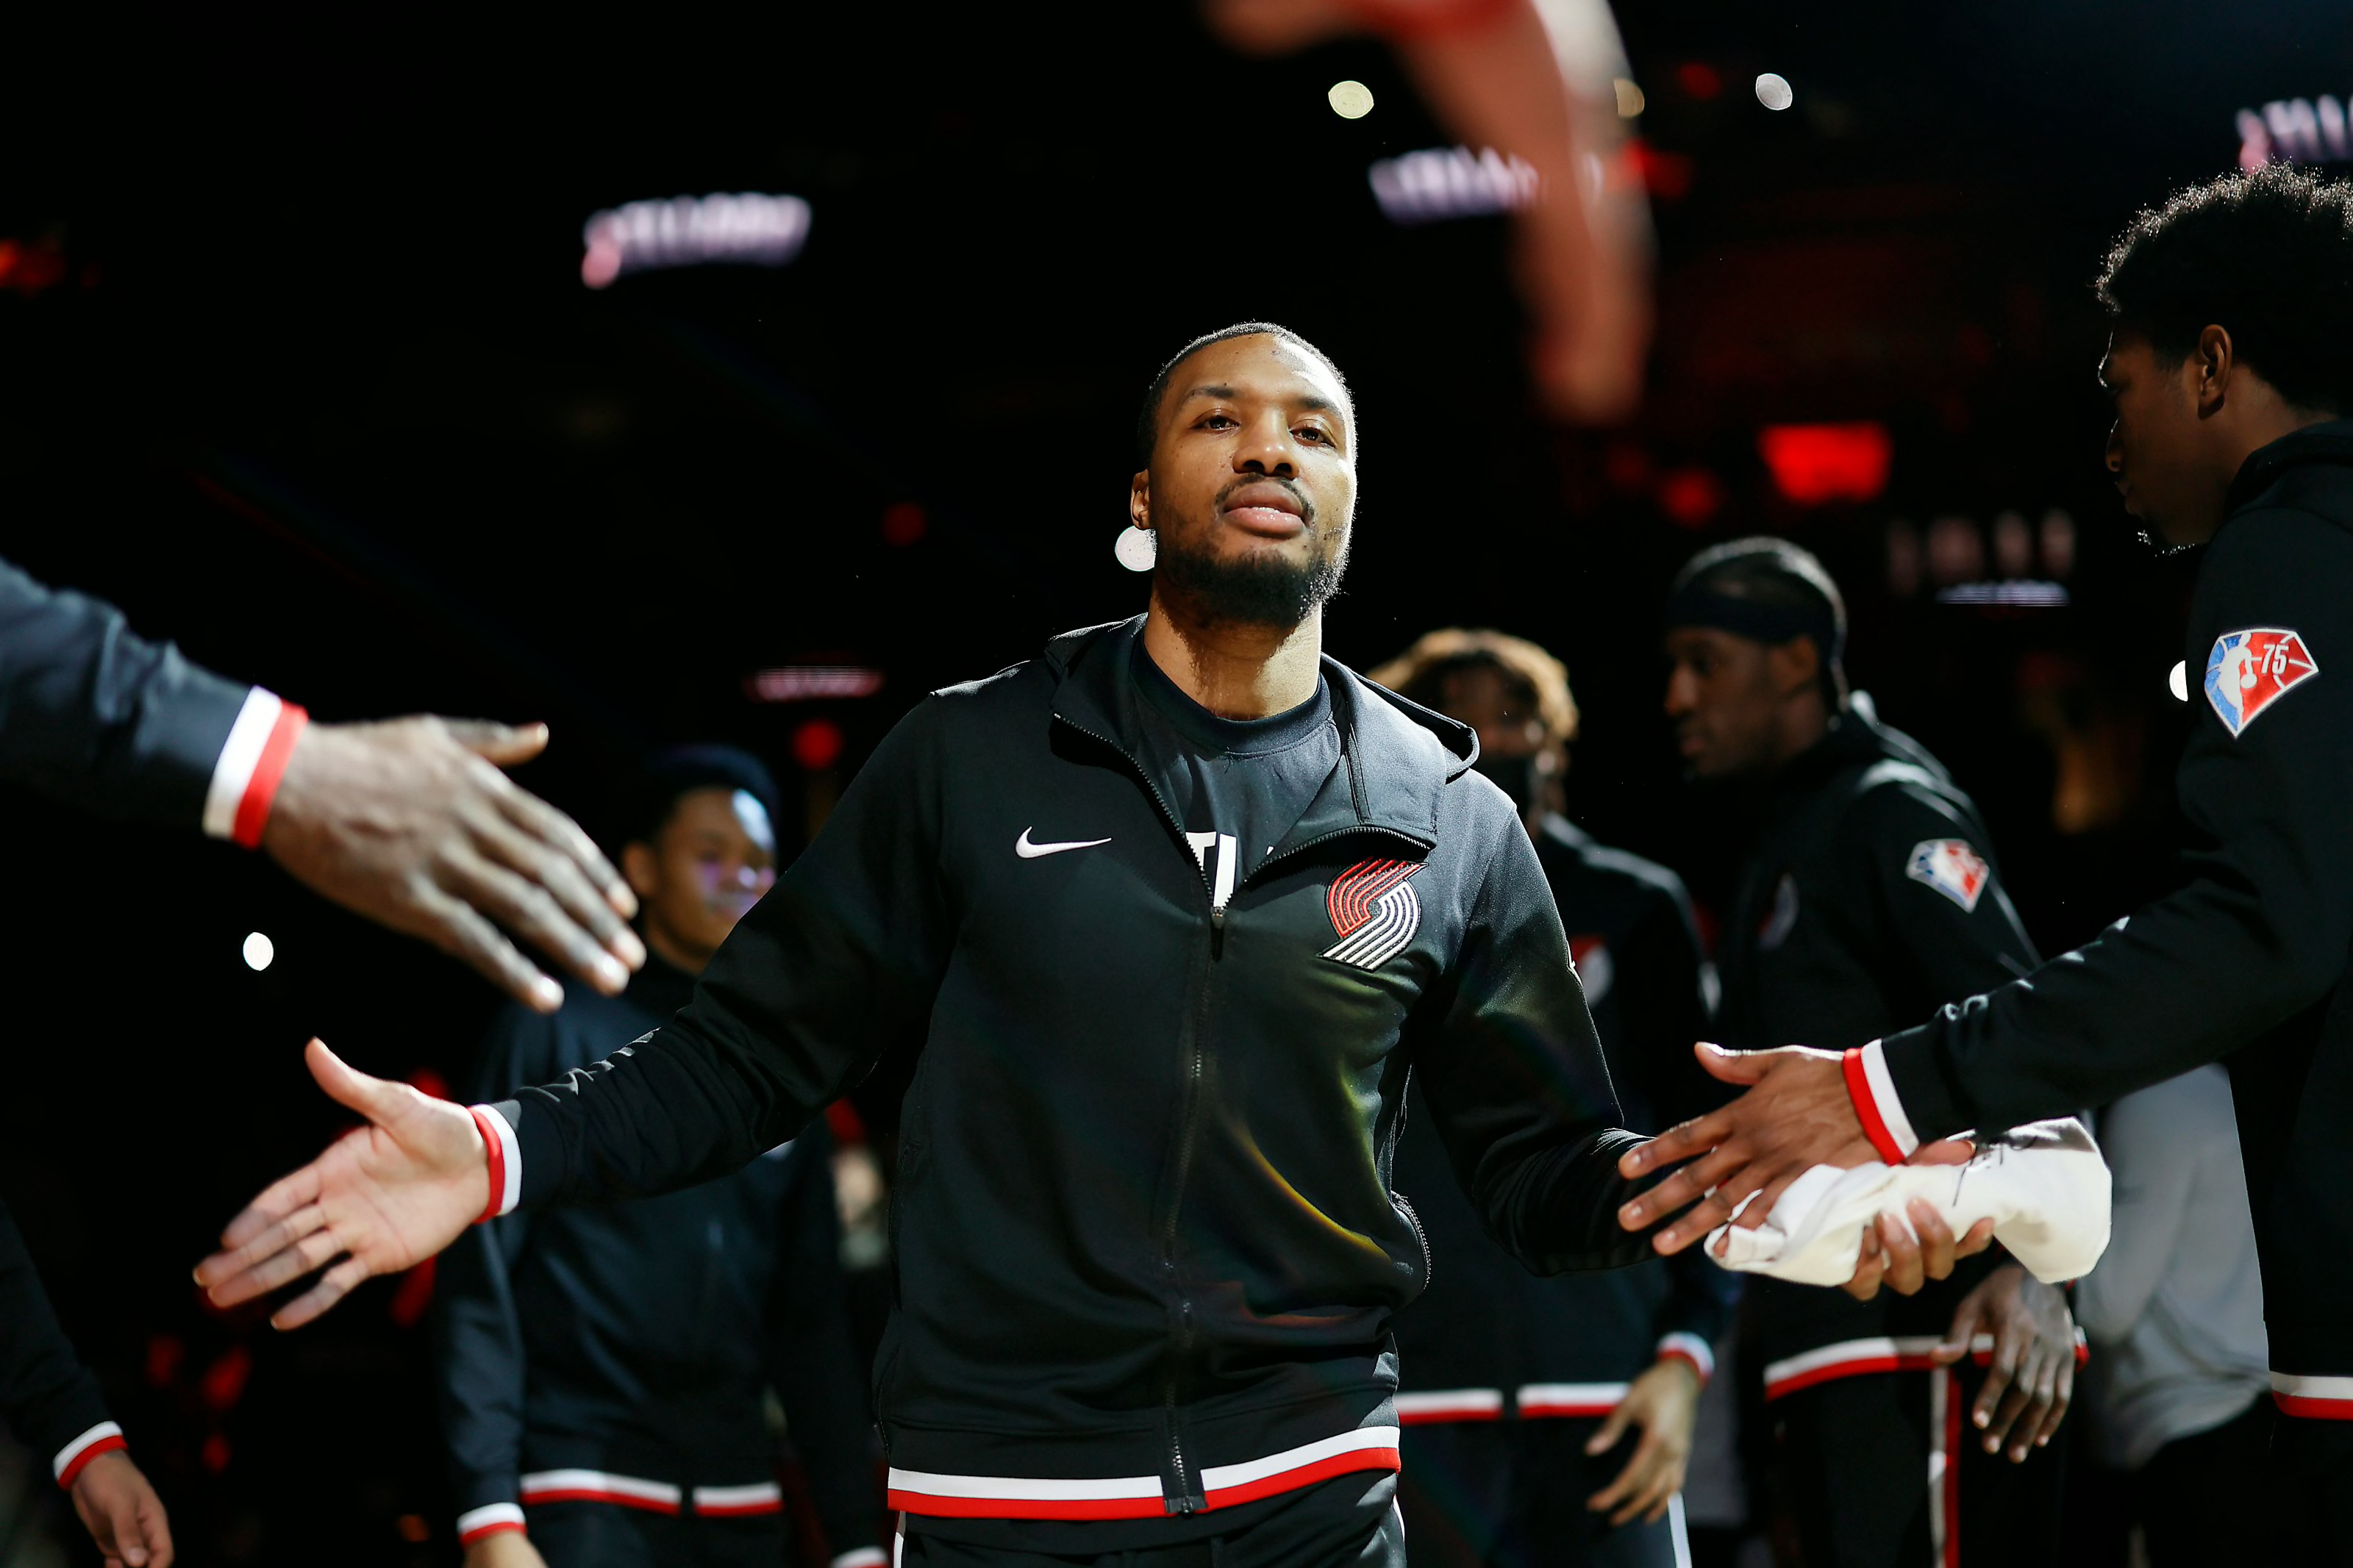 Is Damian Lillard right to put his legacy before rings?